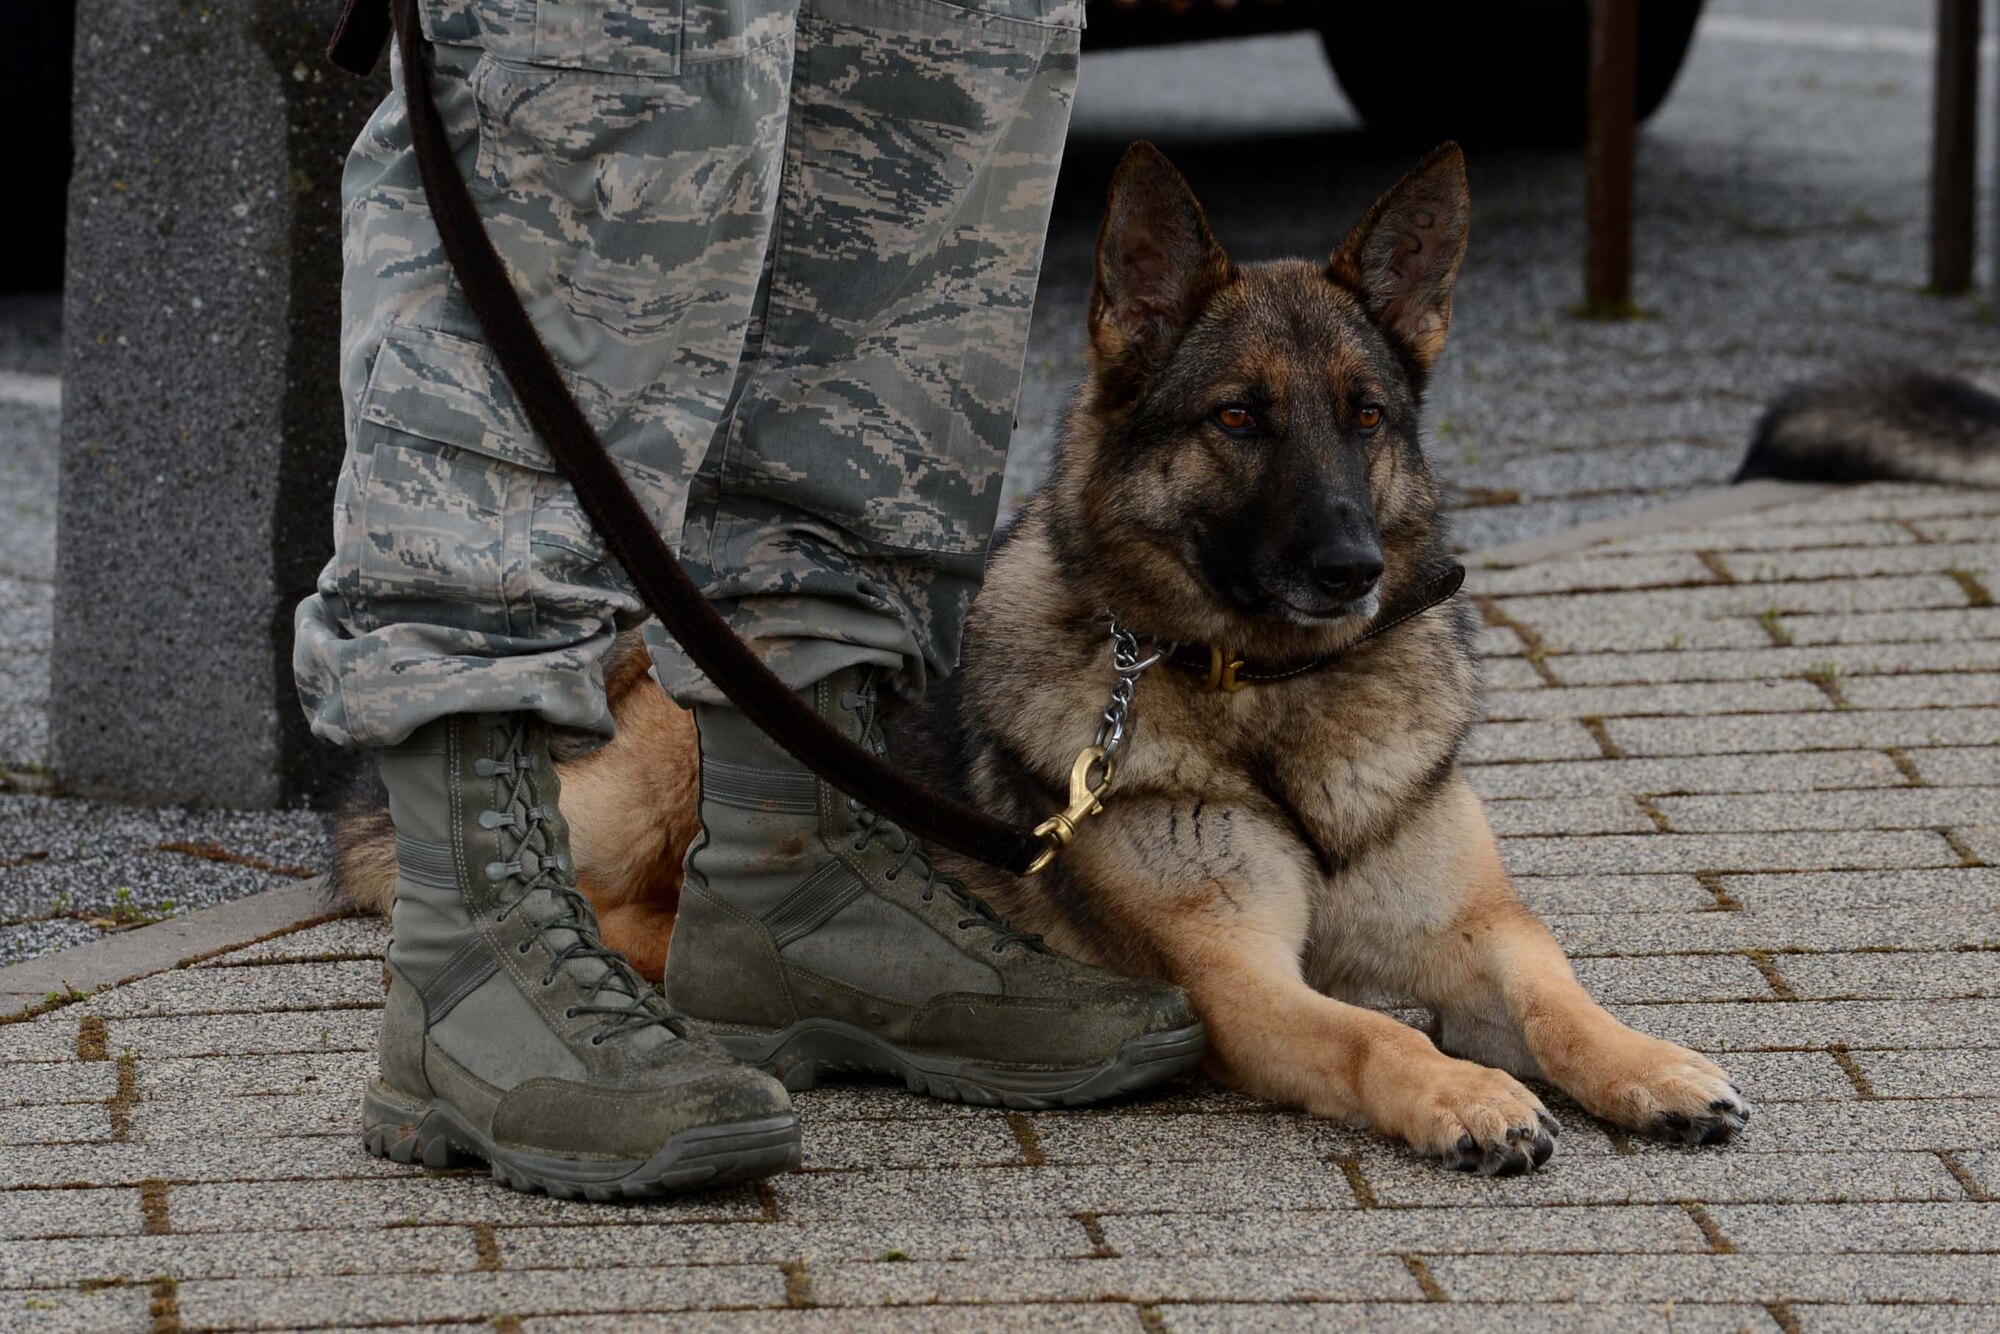 A military working dog lies next to a handler during National Police Week retreat ceremony at Spangdahlem Air Base, Germany, May 12, 2014. Police Week is nationally recognized and honors police officers and security forces members who have died in the line of duty. (U.S. Air Force photo by Airman 1st Class Kyle Gese/Released)